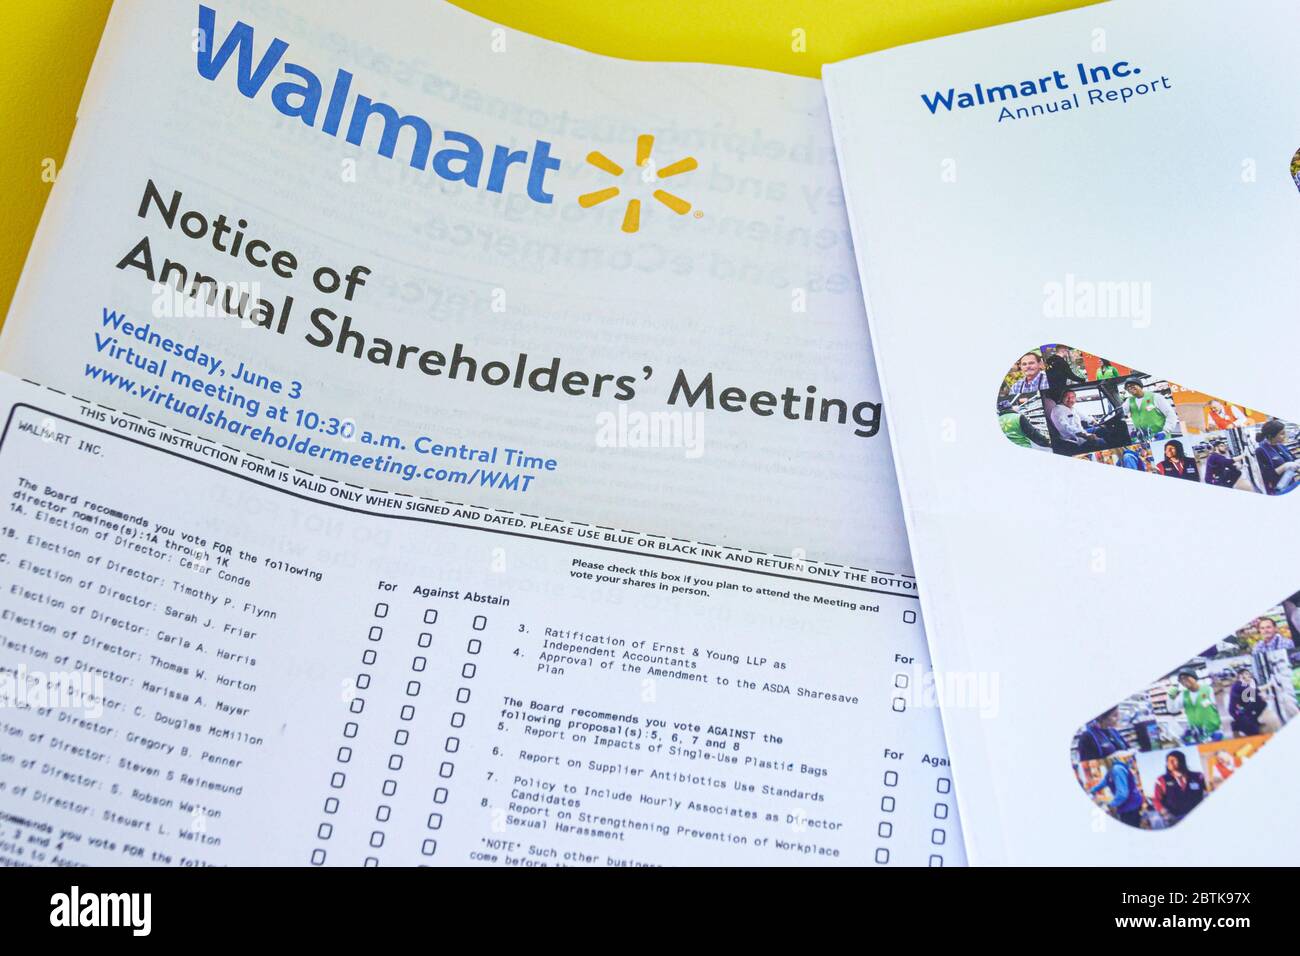 Miami Beach Florida,Walmart annual report shareholders' meeting,board of directors voting candidates,stock market investing investment,FL200520013 Stock Photo